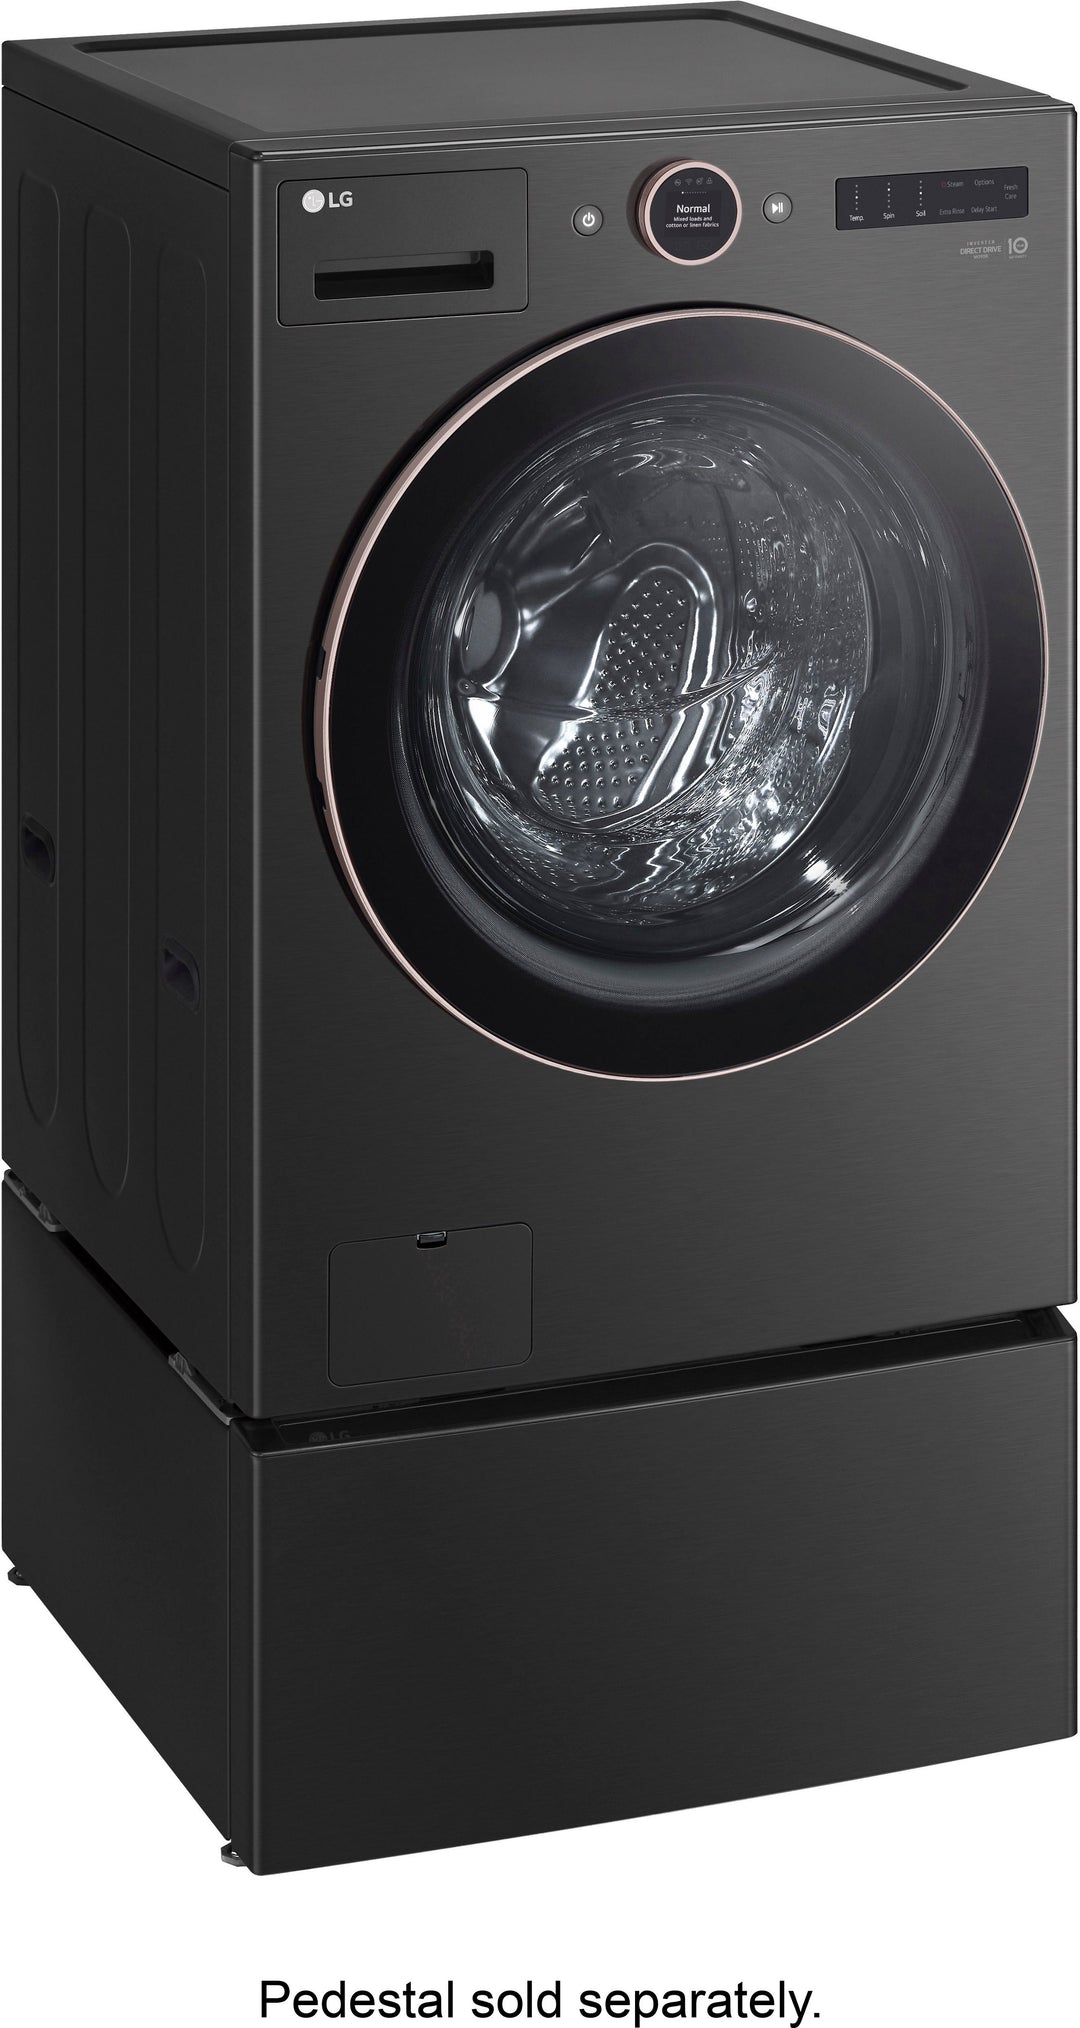 LG - 5.0 Cu. Ft. High-Efficiency Smart Front Load Washer with Steam and TurboWash 360 - Black Steel_14